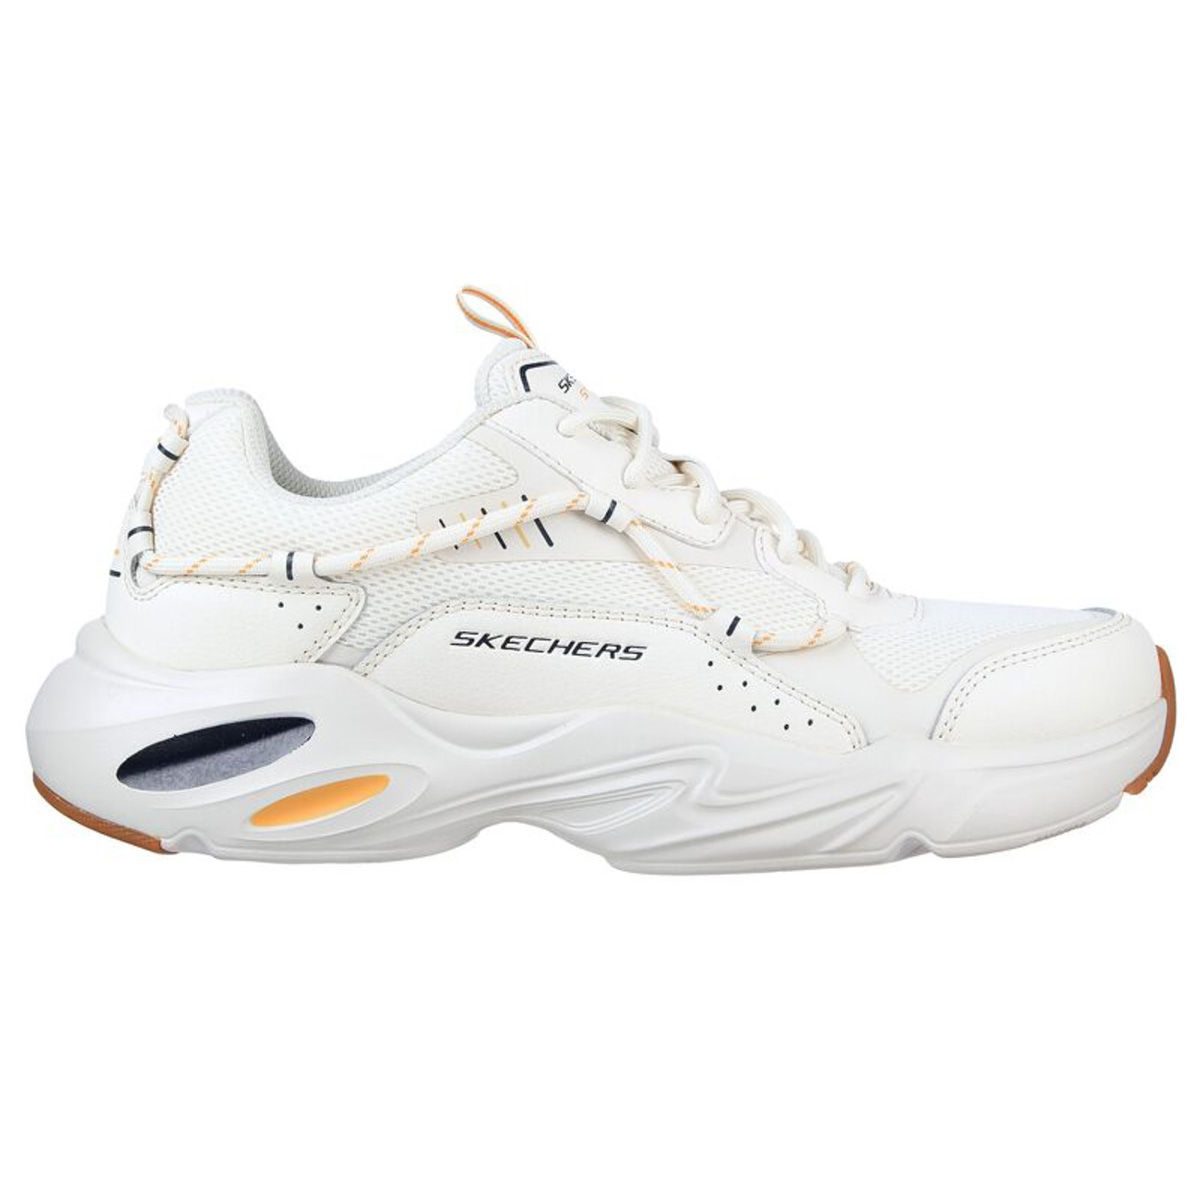 Buy Skechers Men's Stamina AIRY Off White Leather Sneaker (51937-OFWT) at  Amazon.in